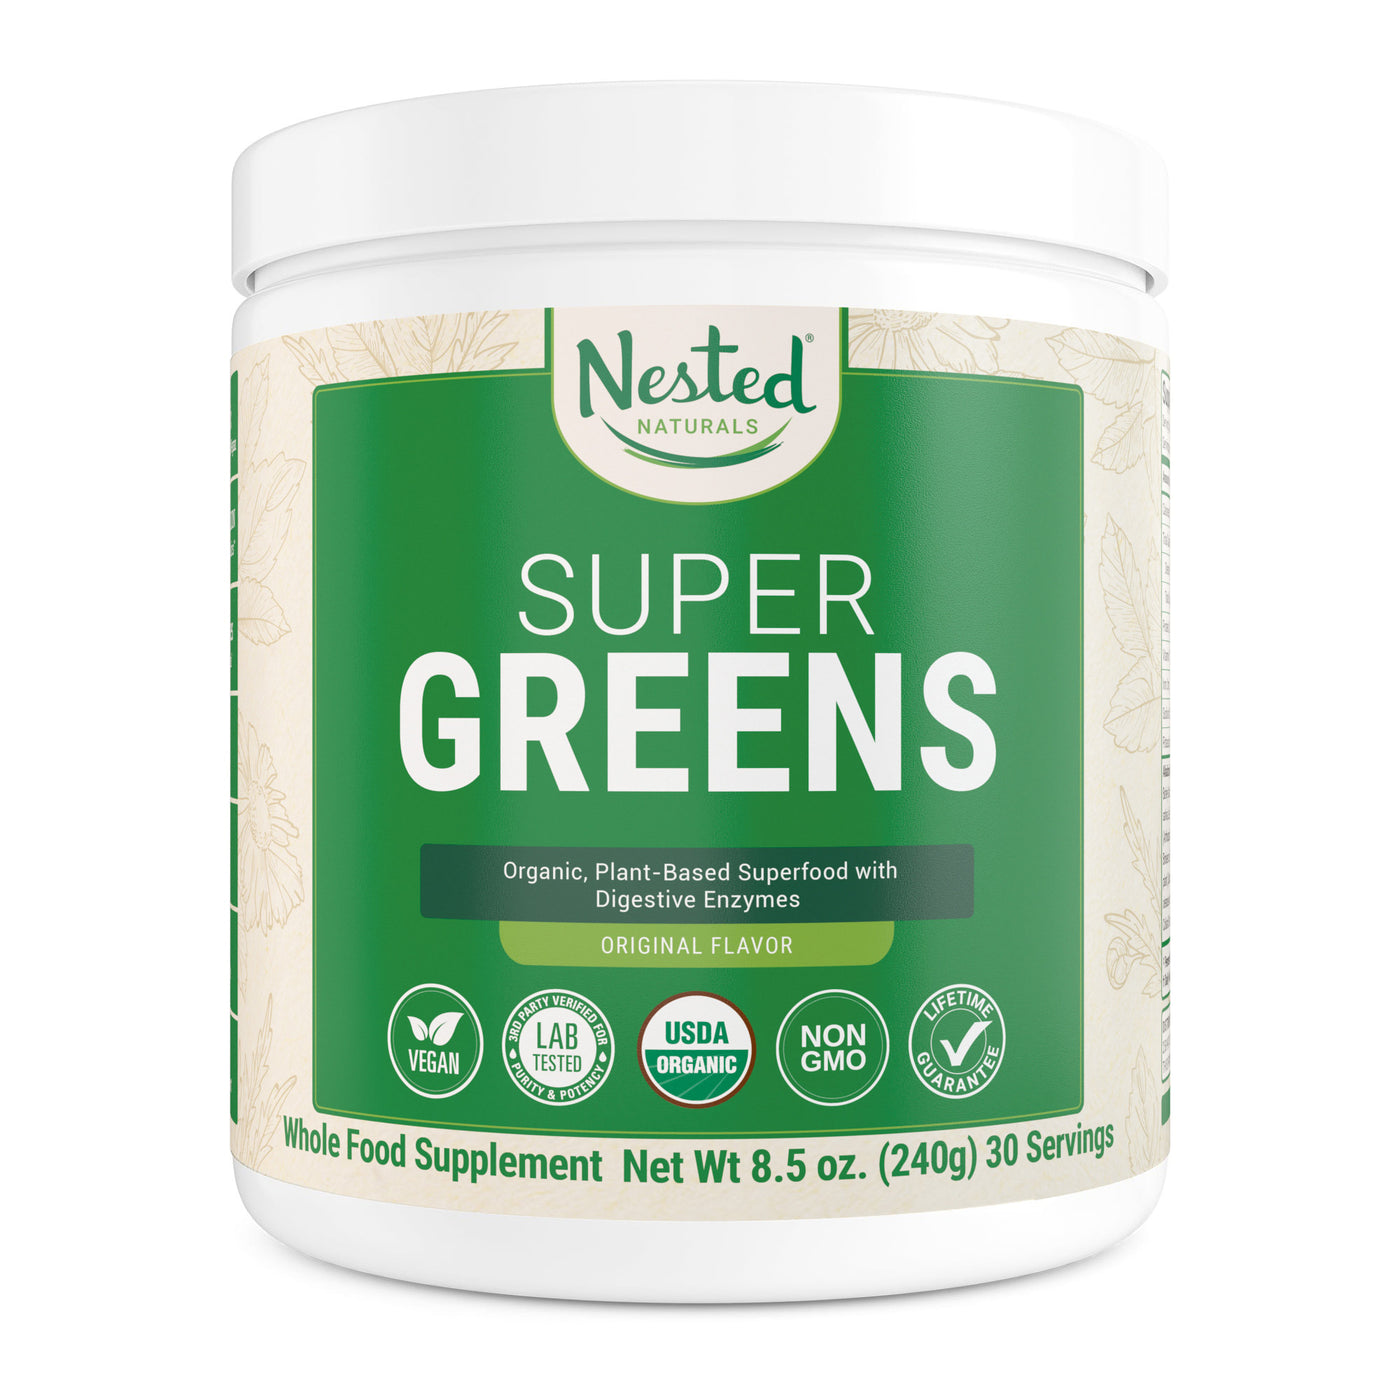 Everything You Need to Know About Green Powder Supplements